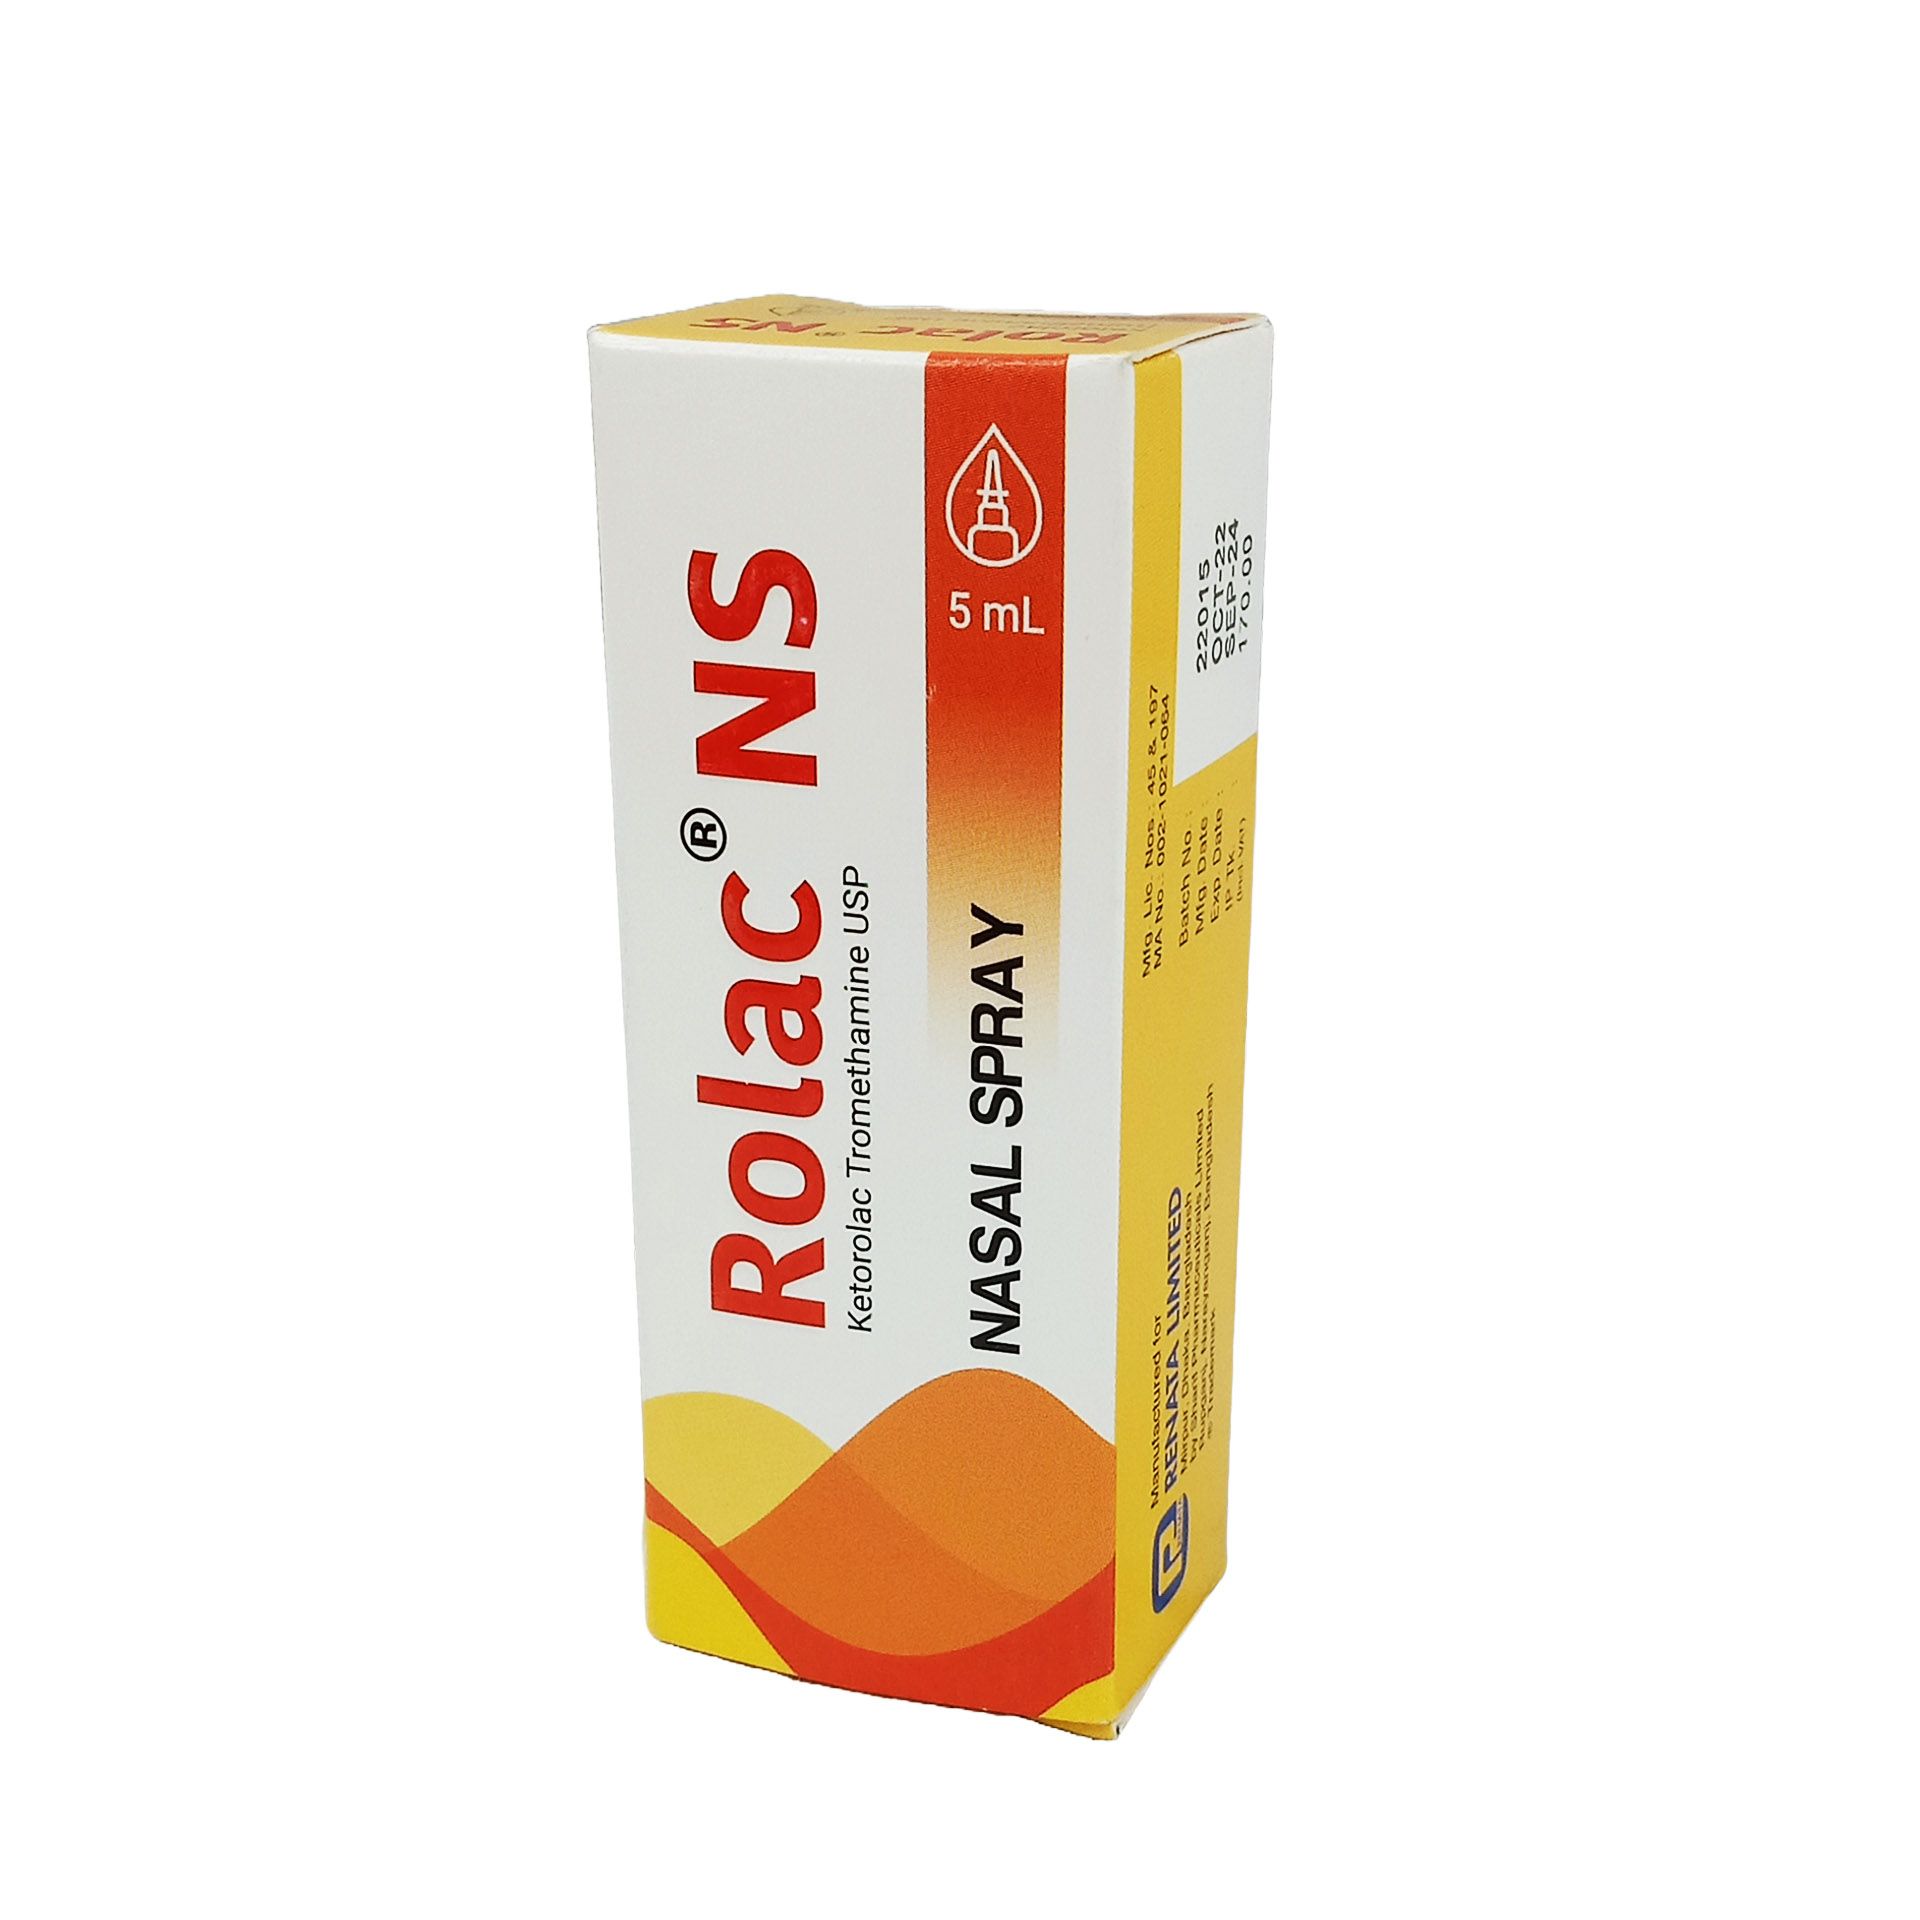 Rolac NS 15.75mg/actuation Spray